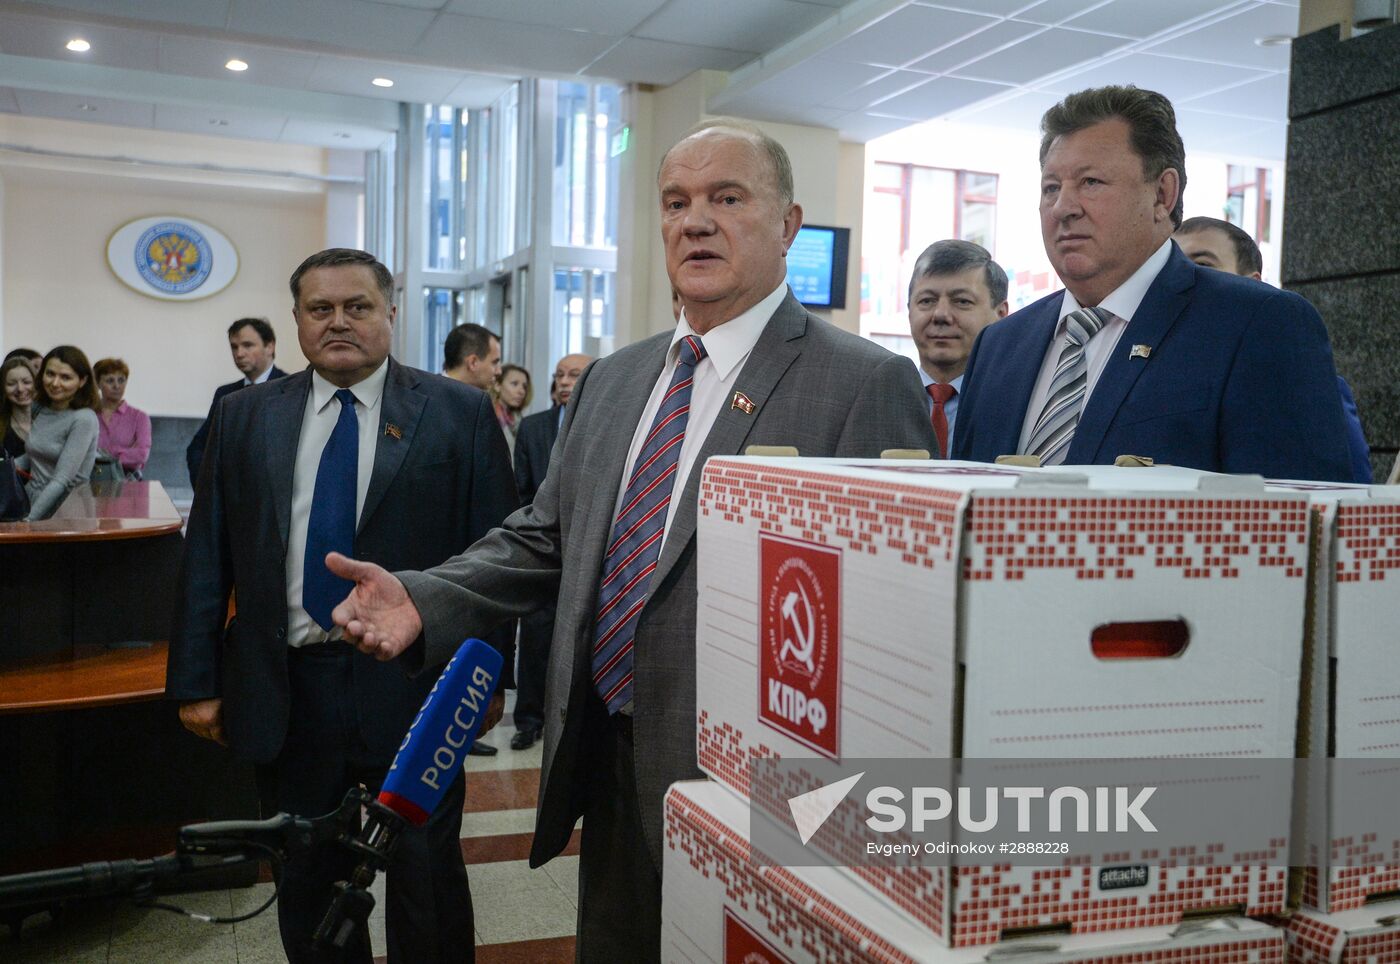 Gennady Zyuganov submits list of State Duma candidates to Central Election Commission